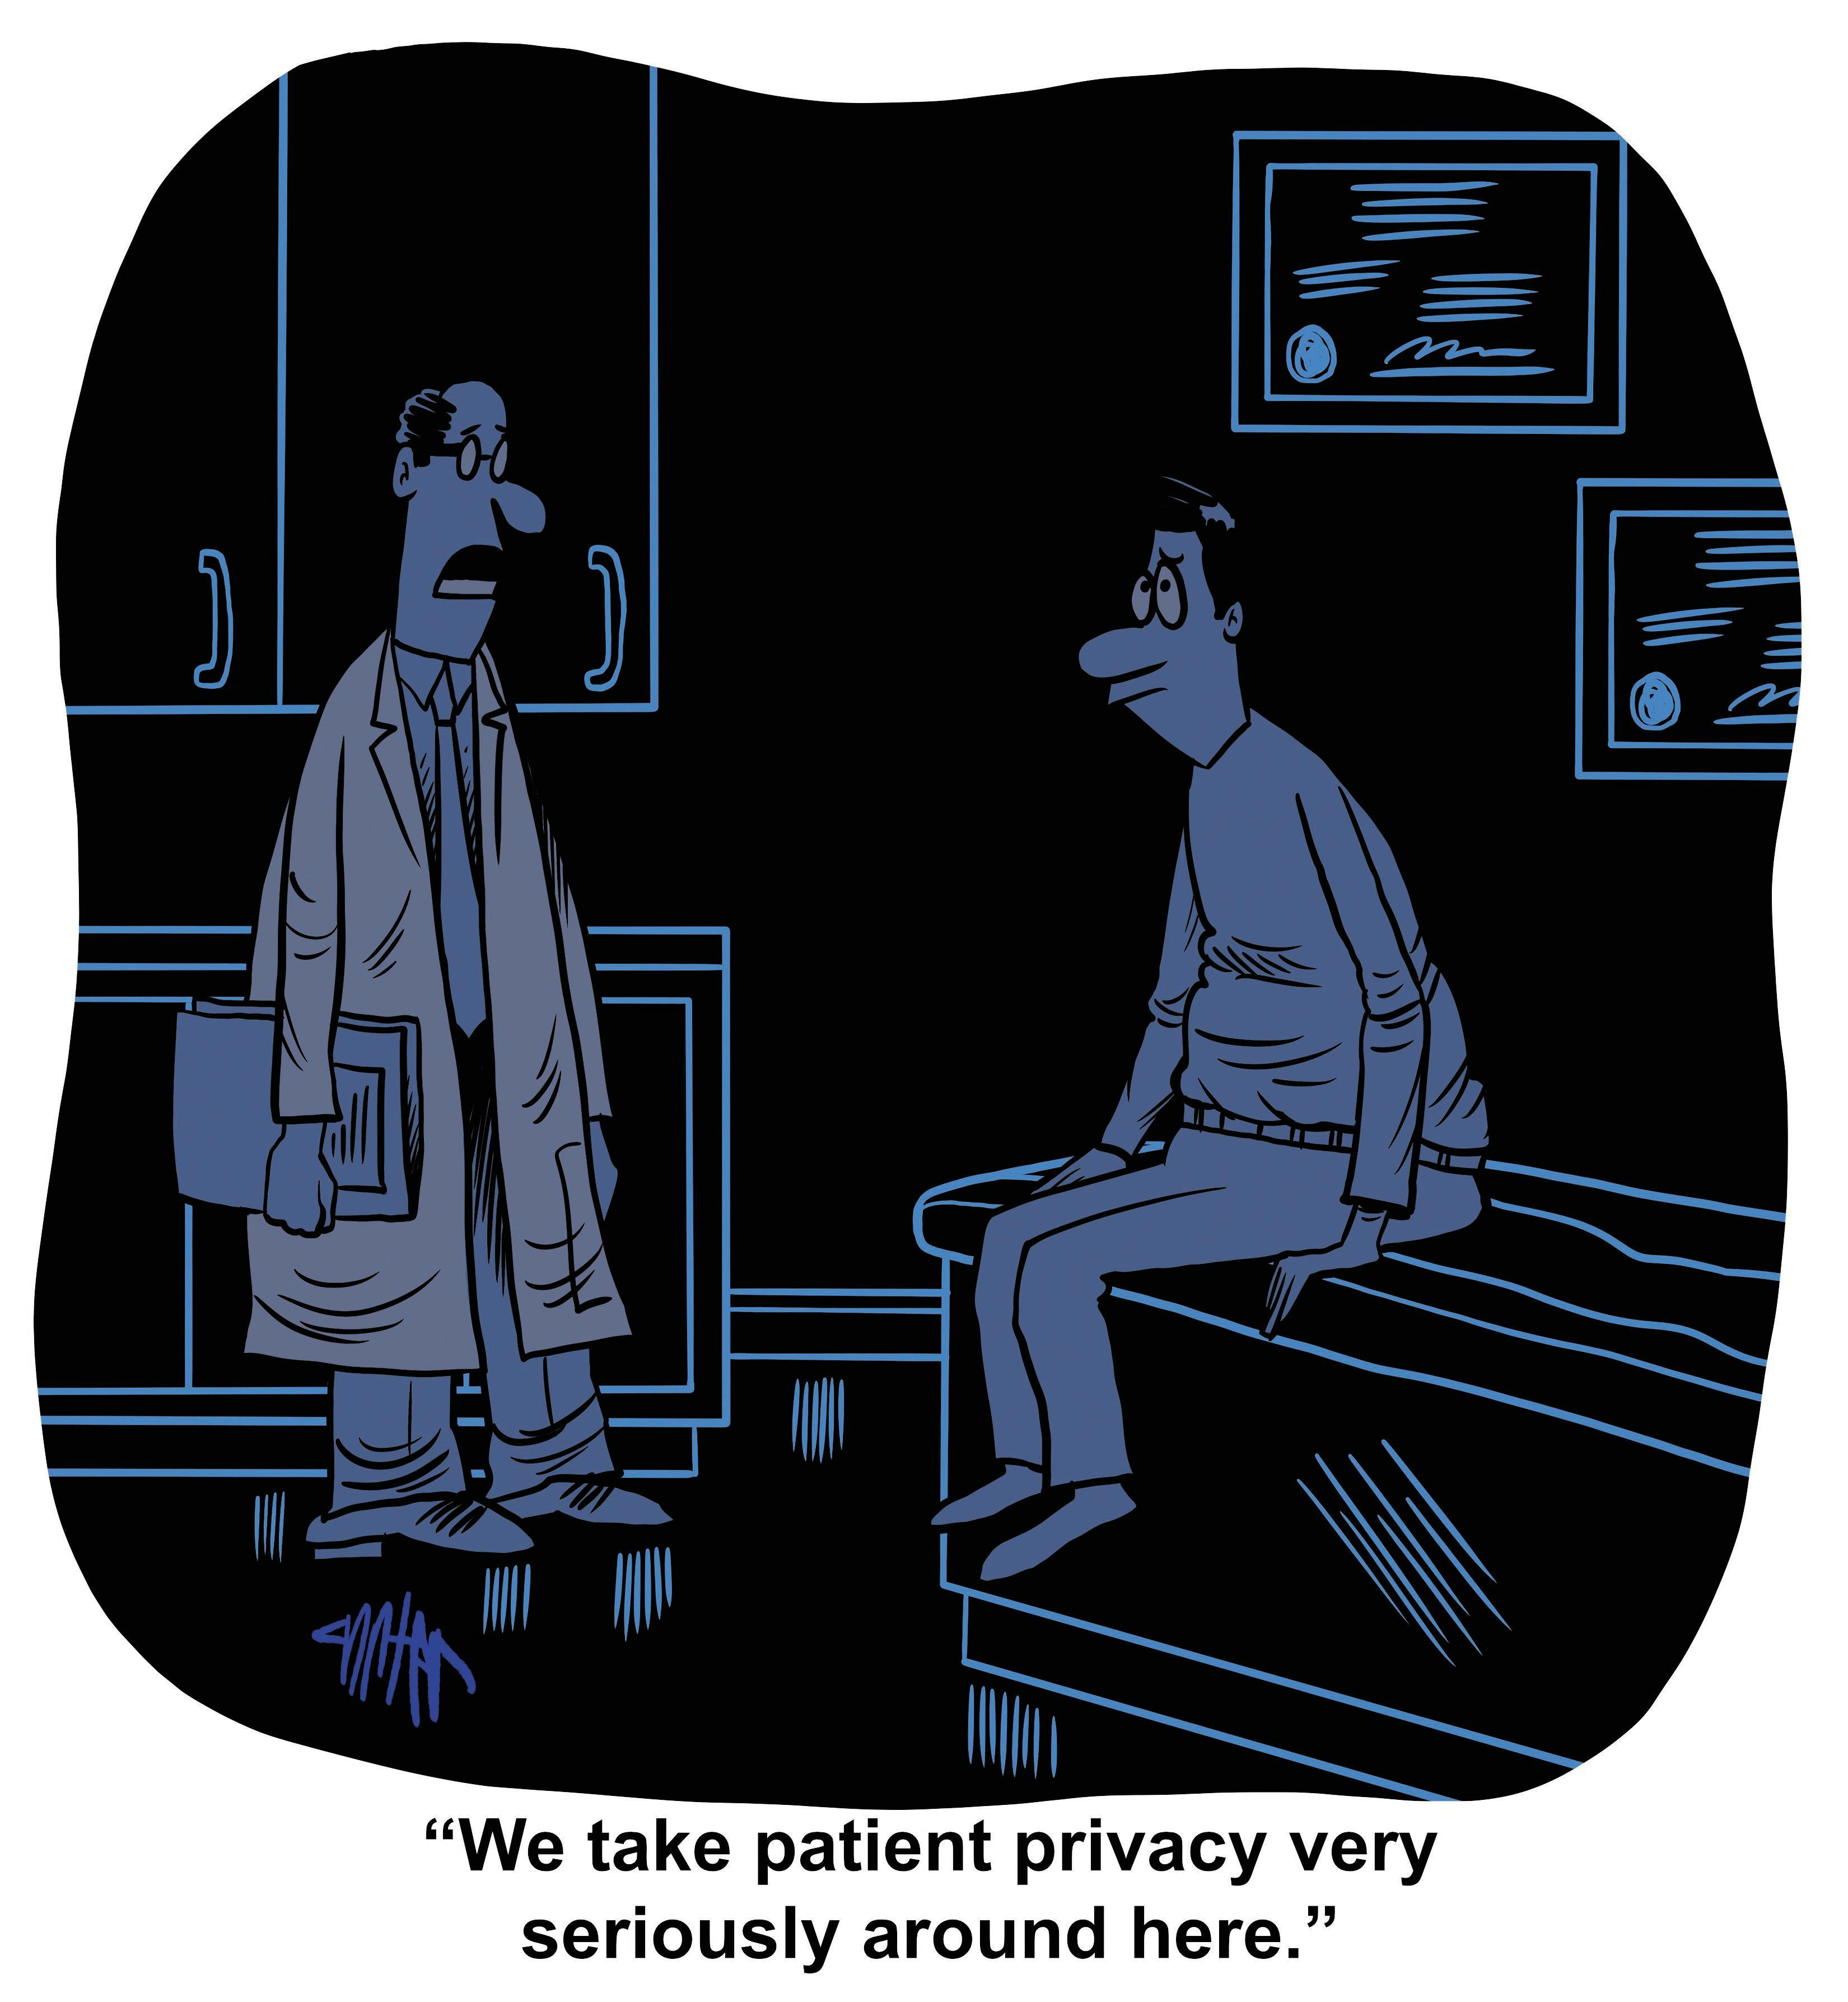 Funny Bone: Privacy is a serious matter